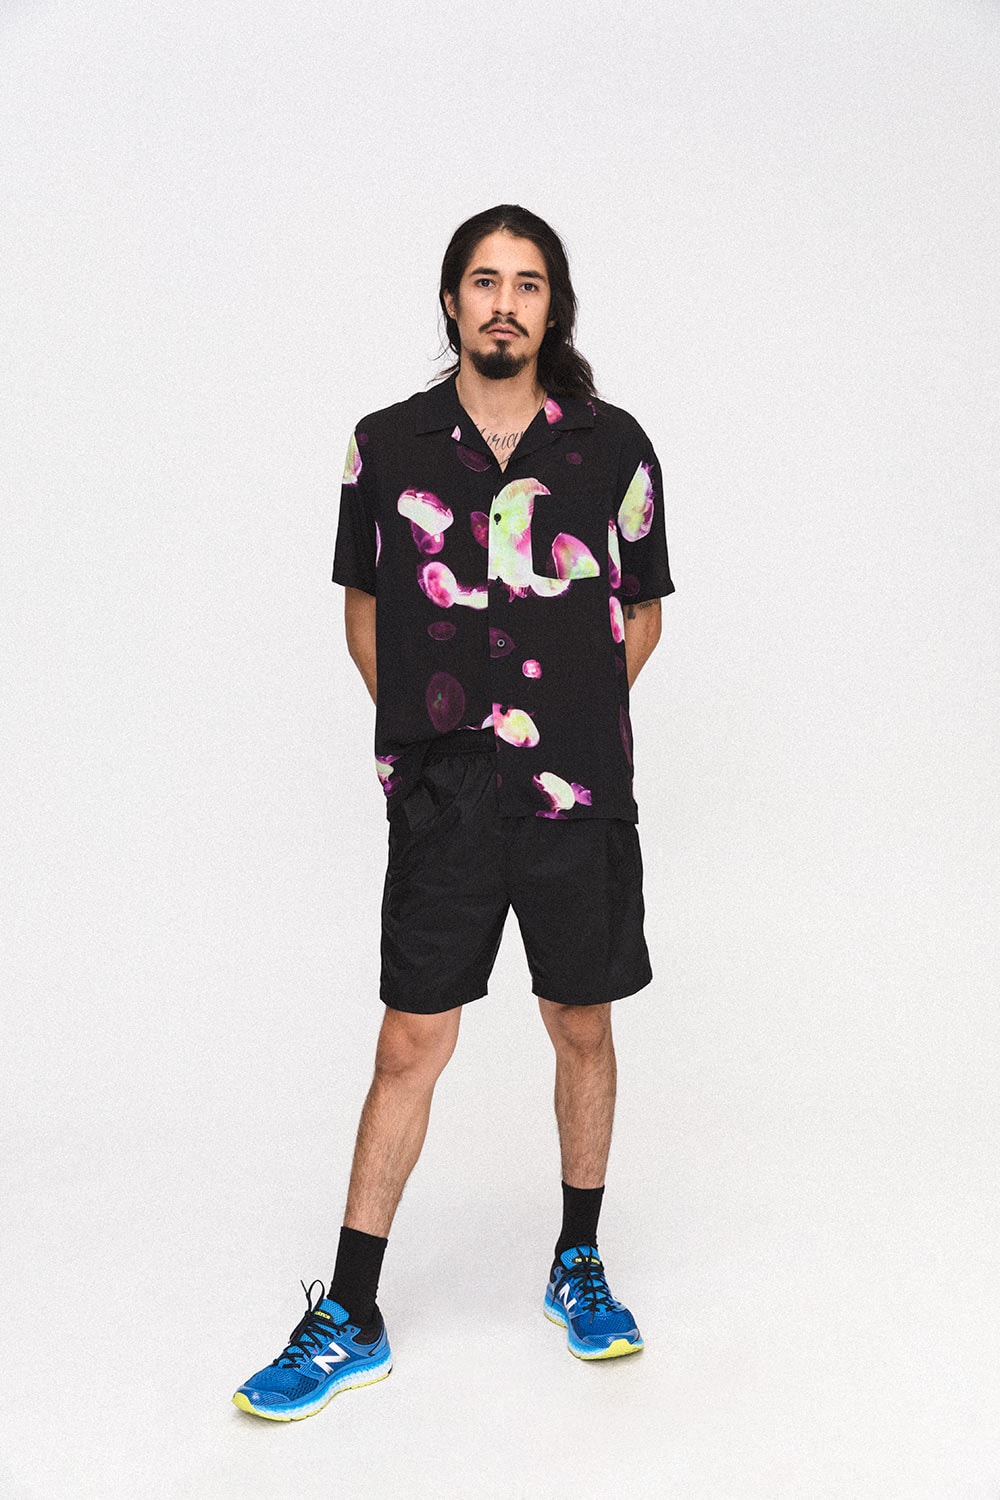 Stussy Summer 2018 Lookbook collection may release date info drop